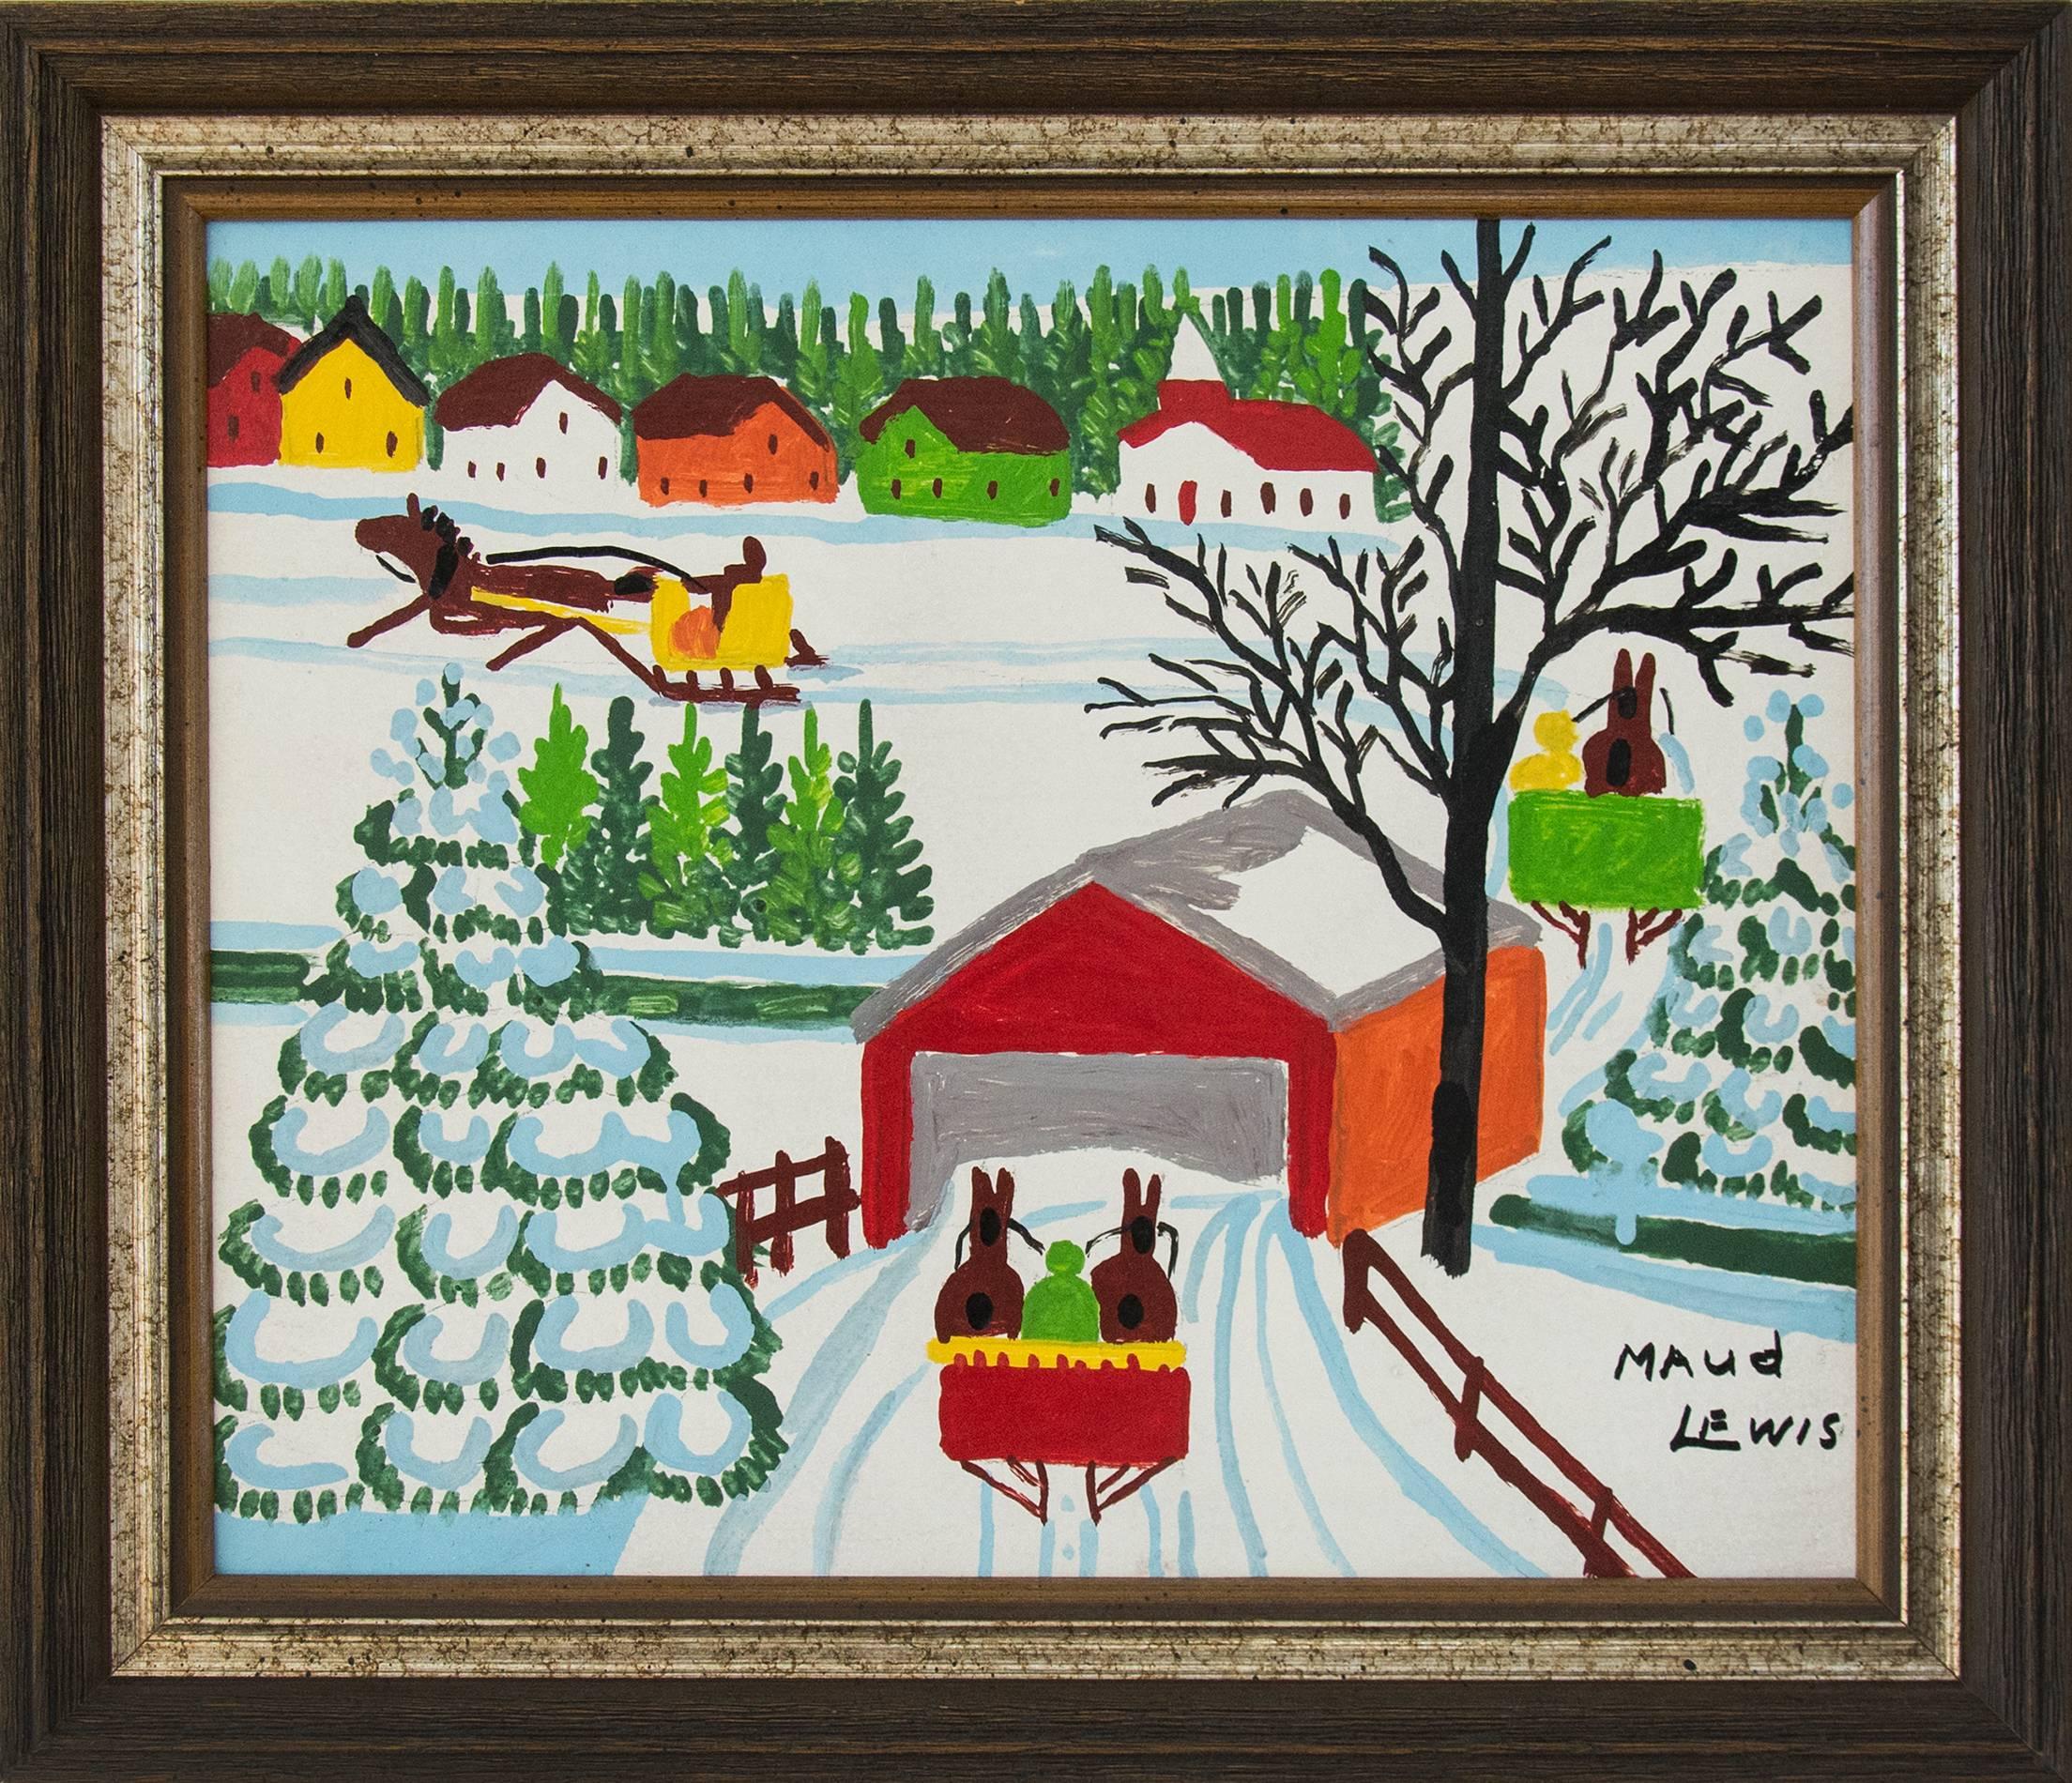 Covered Bridge - Painting by Maud Lewis